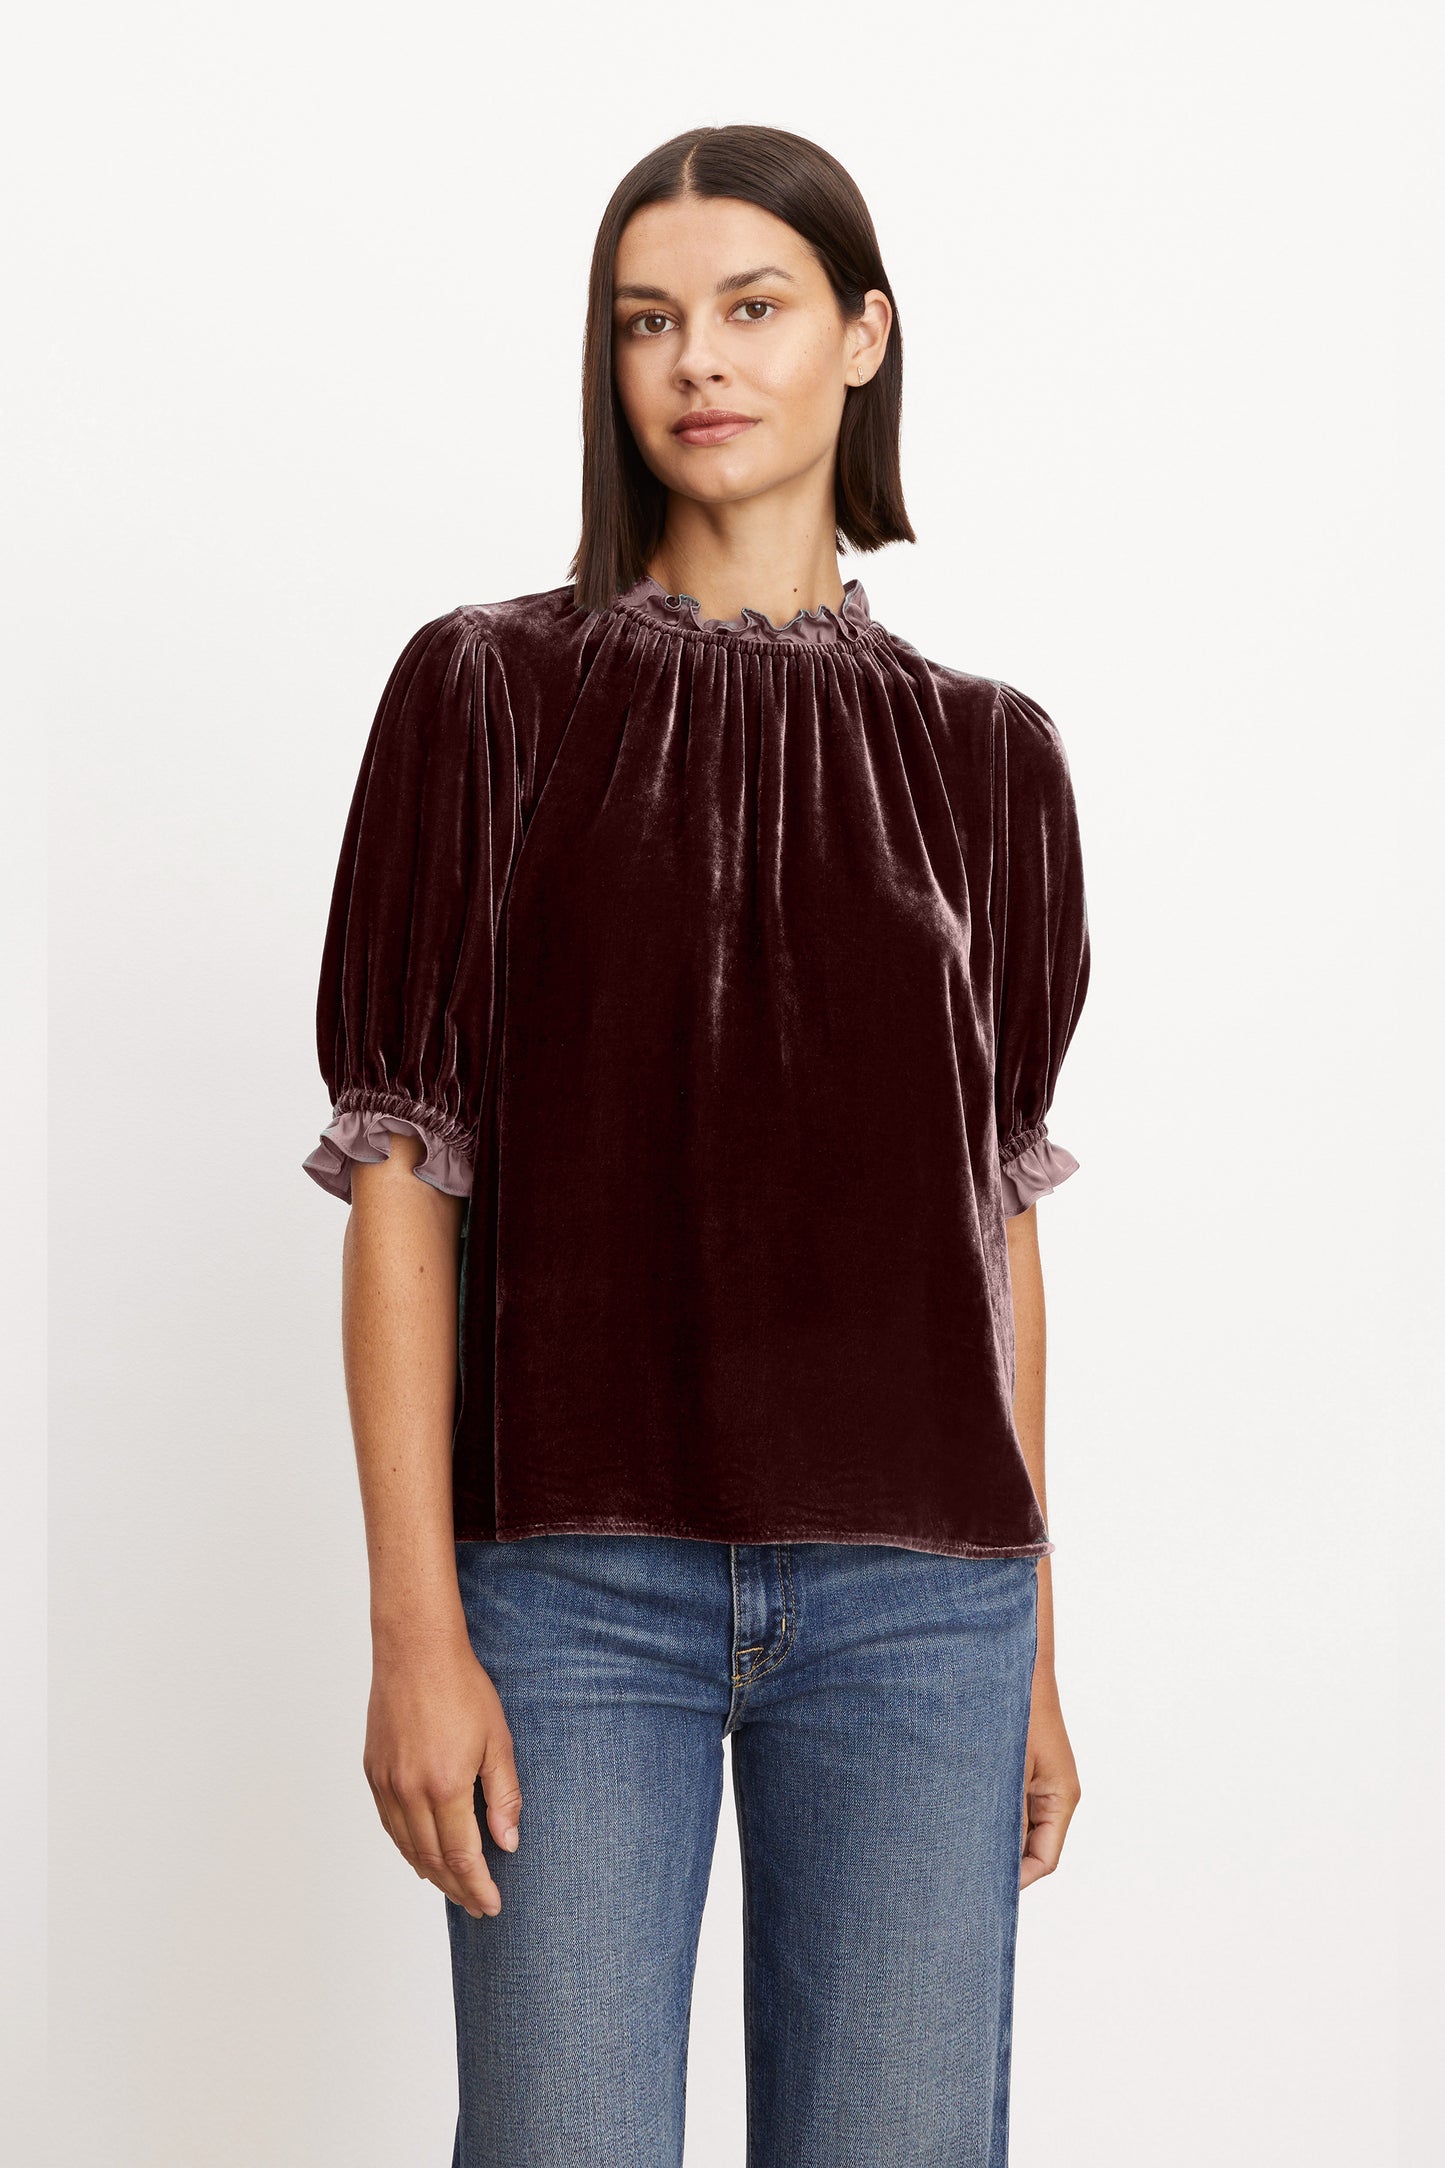 VAL TOP IN WINEBERRY